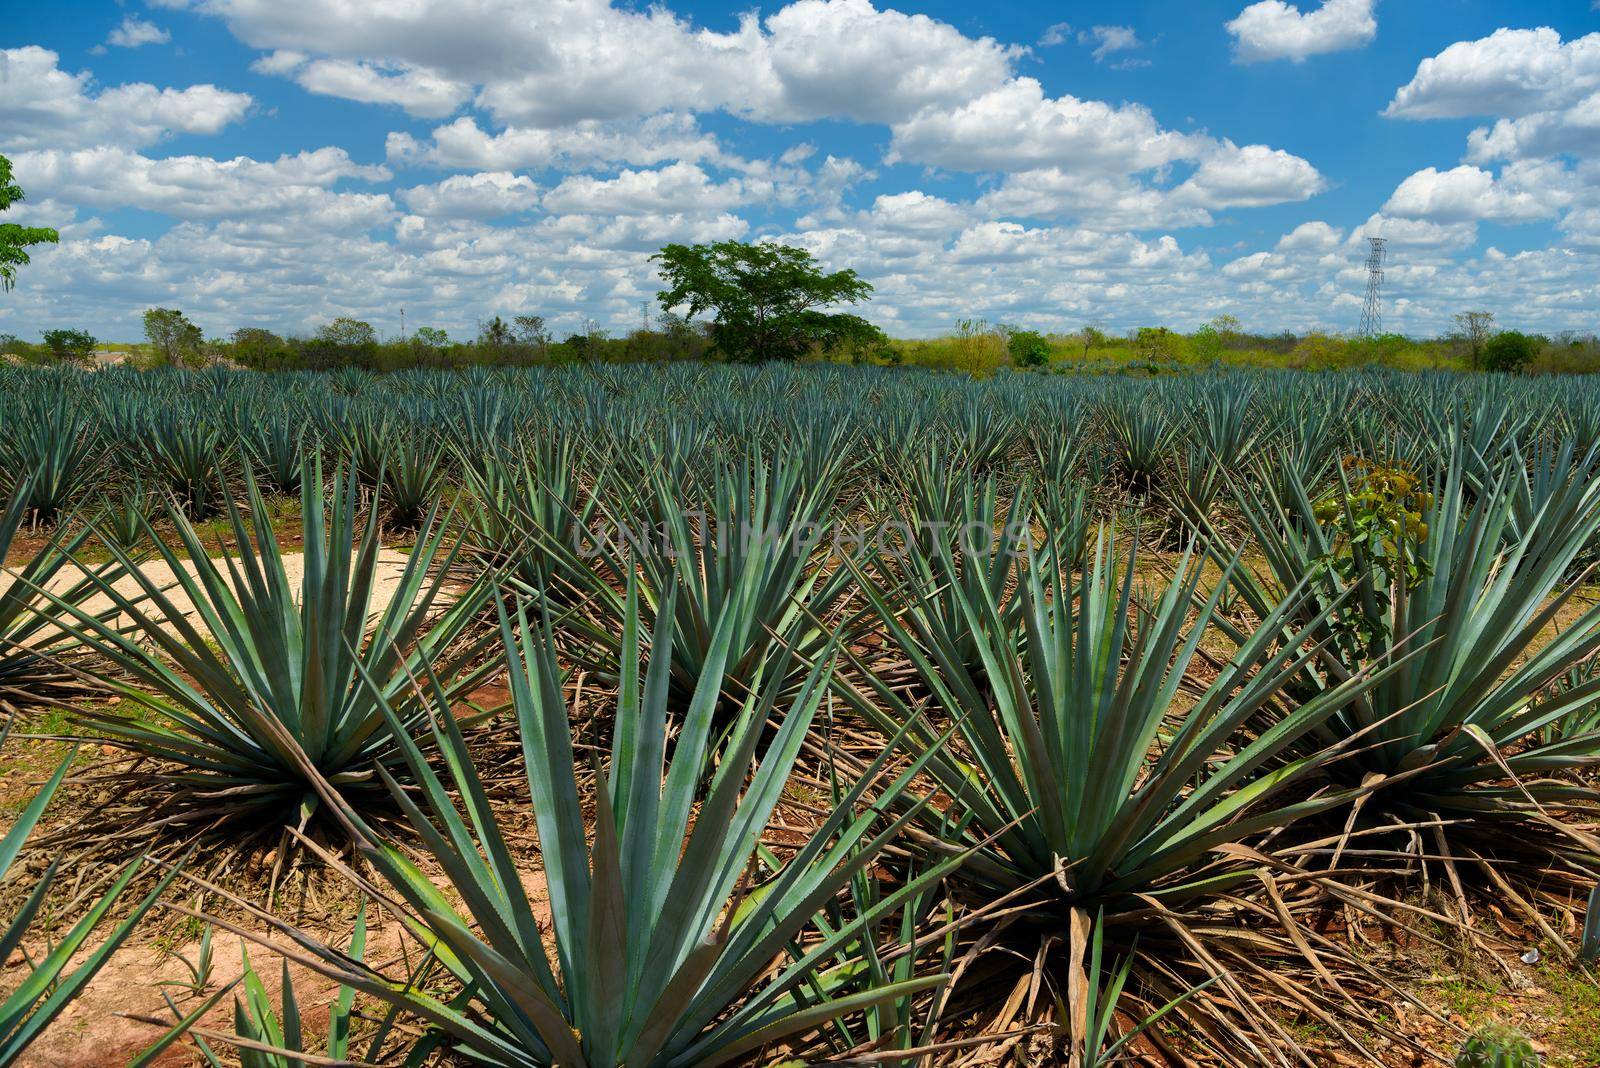 The field of agave planted for the manufacture of tequila. Mexico